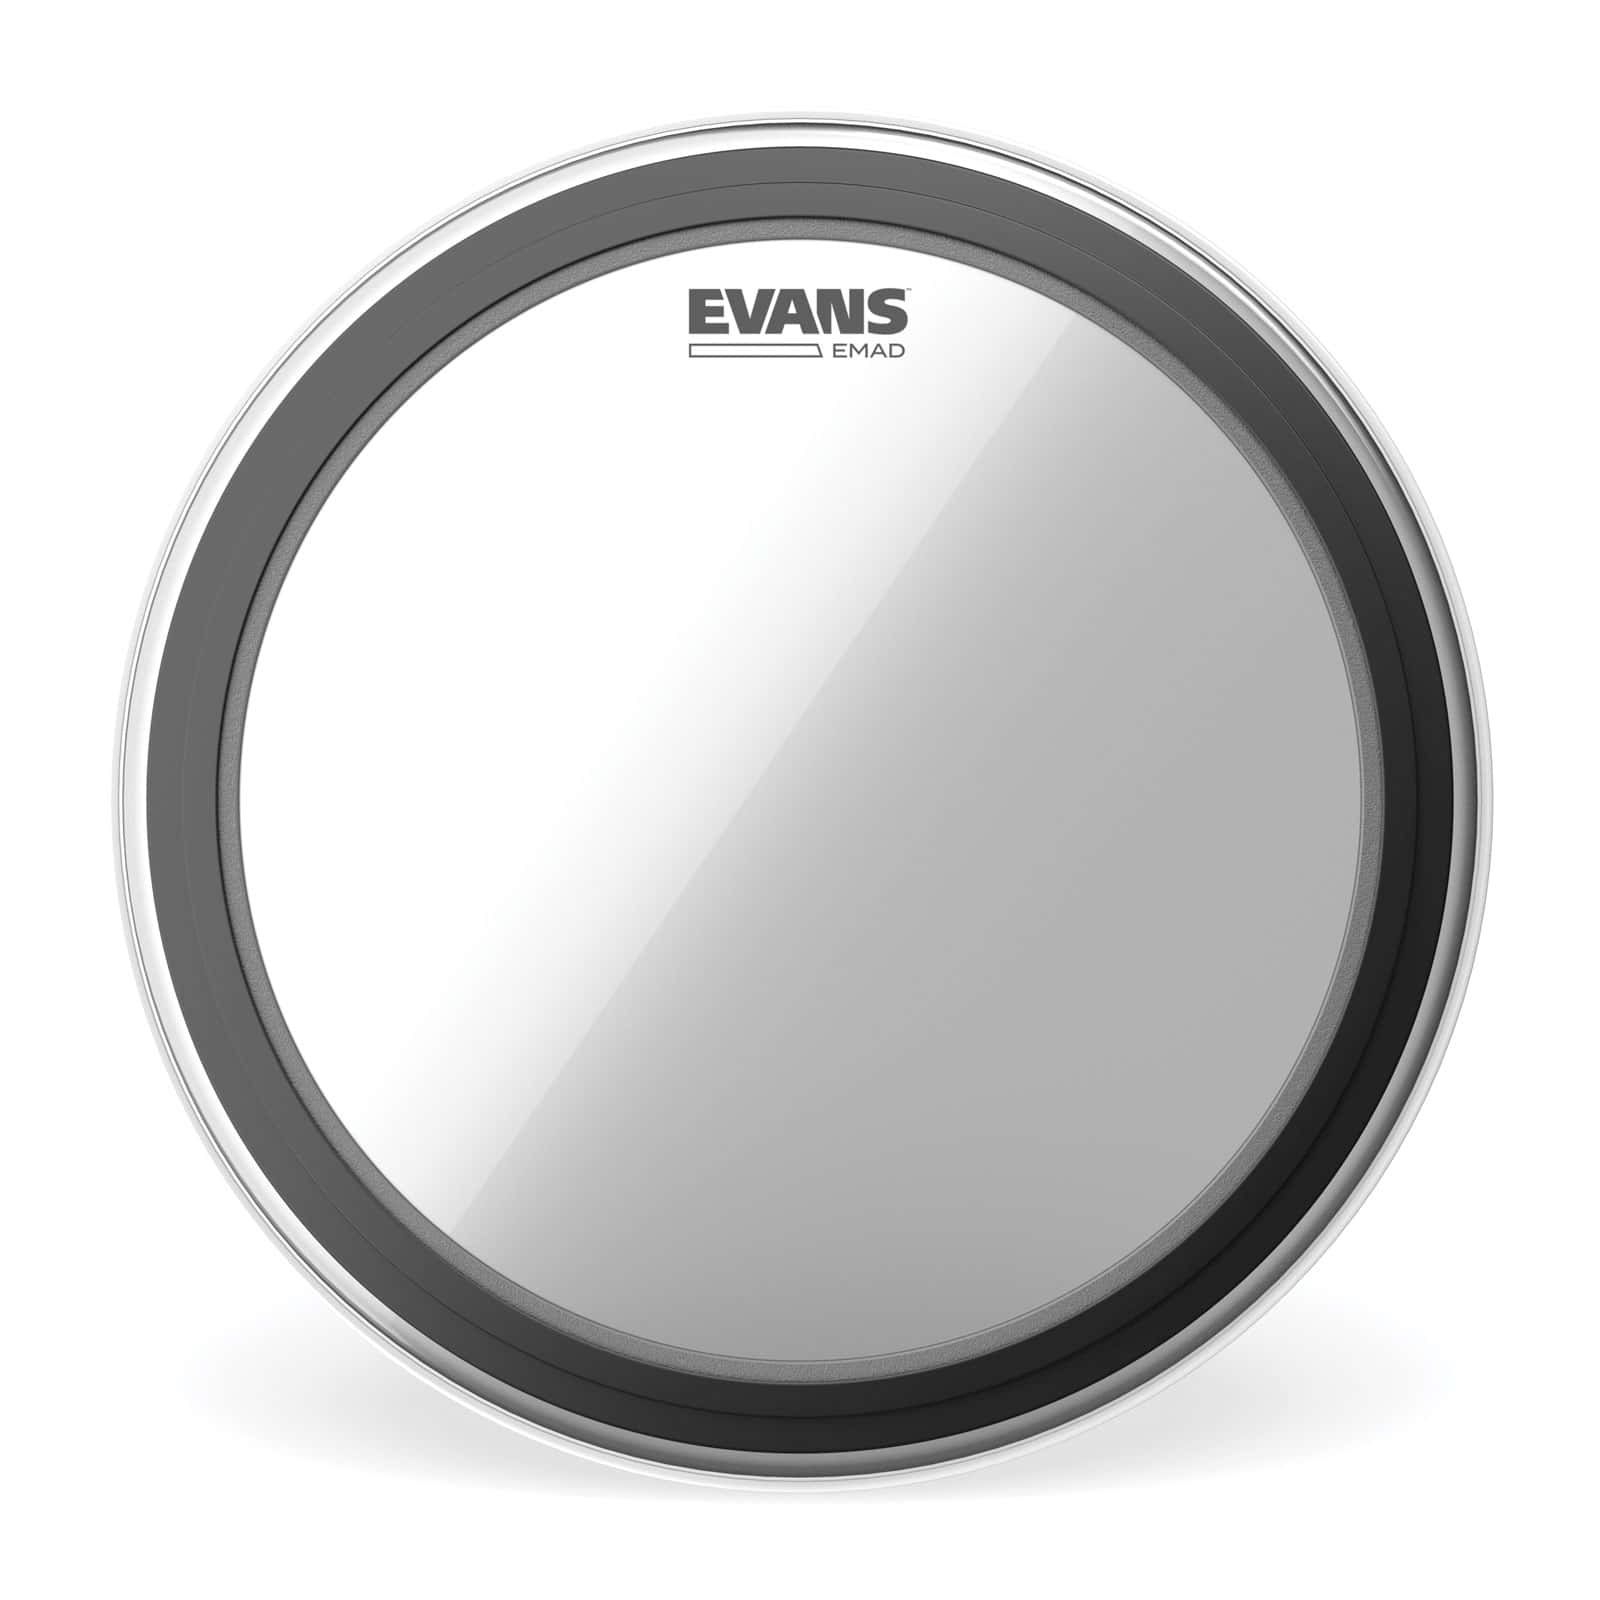 EVANS BD18EMAD - EMAD CLEAR 18